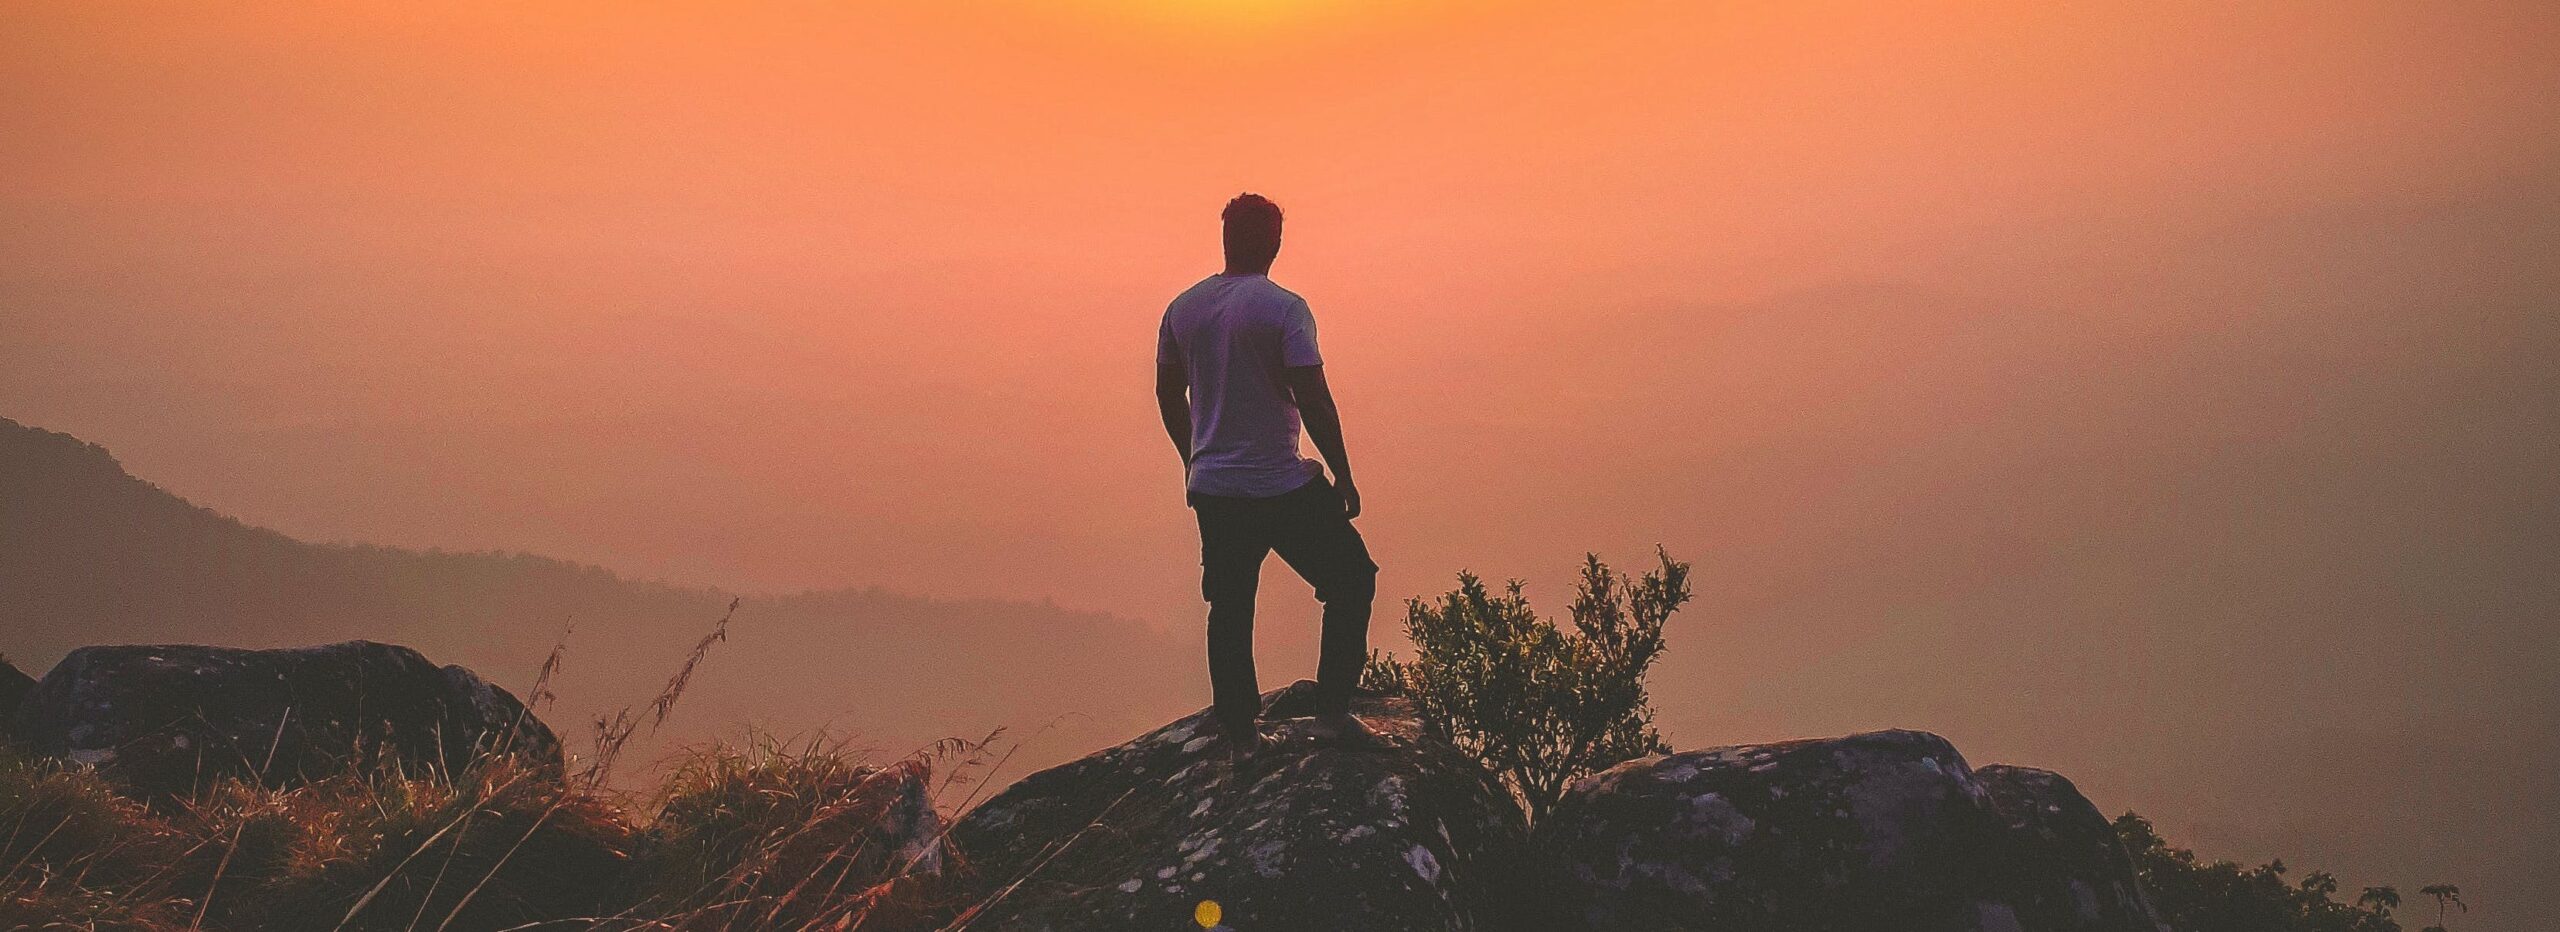 man standing on hill at sunrise representing matthew perry addiction